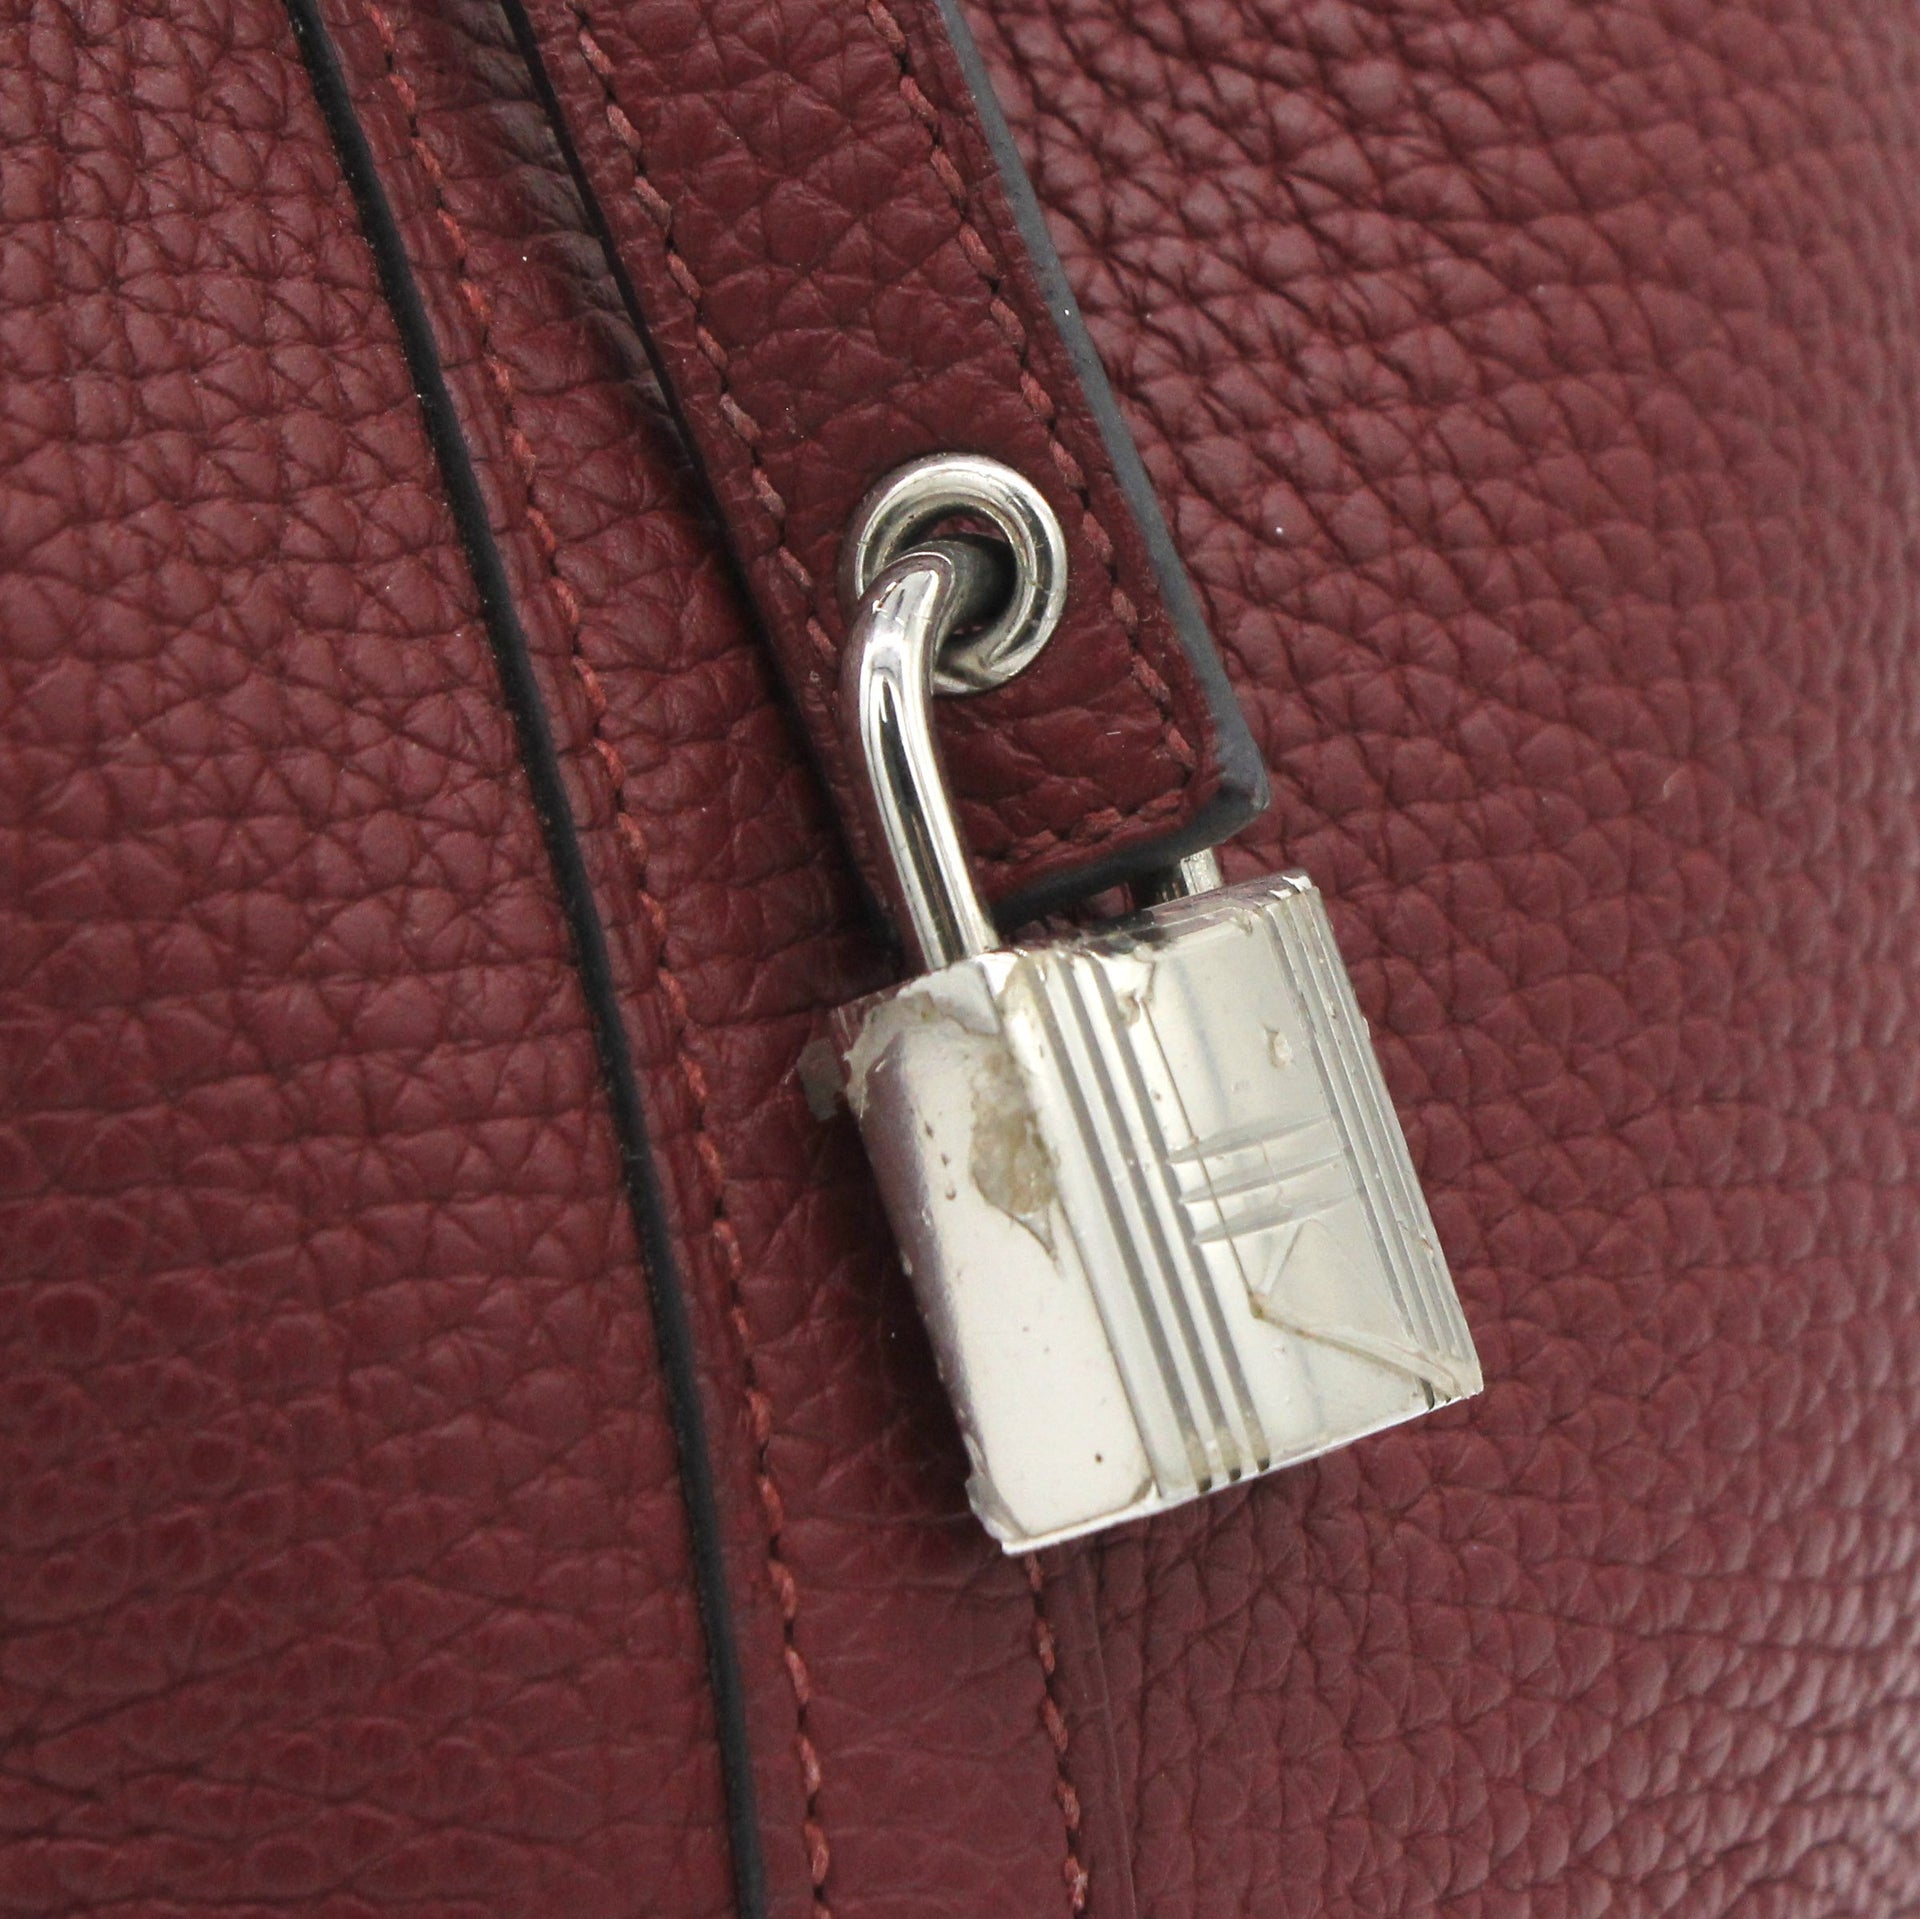 "Picotin Lock" Bag in Red Clemence Leather